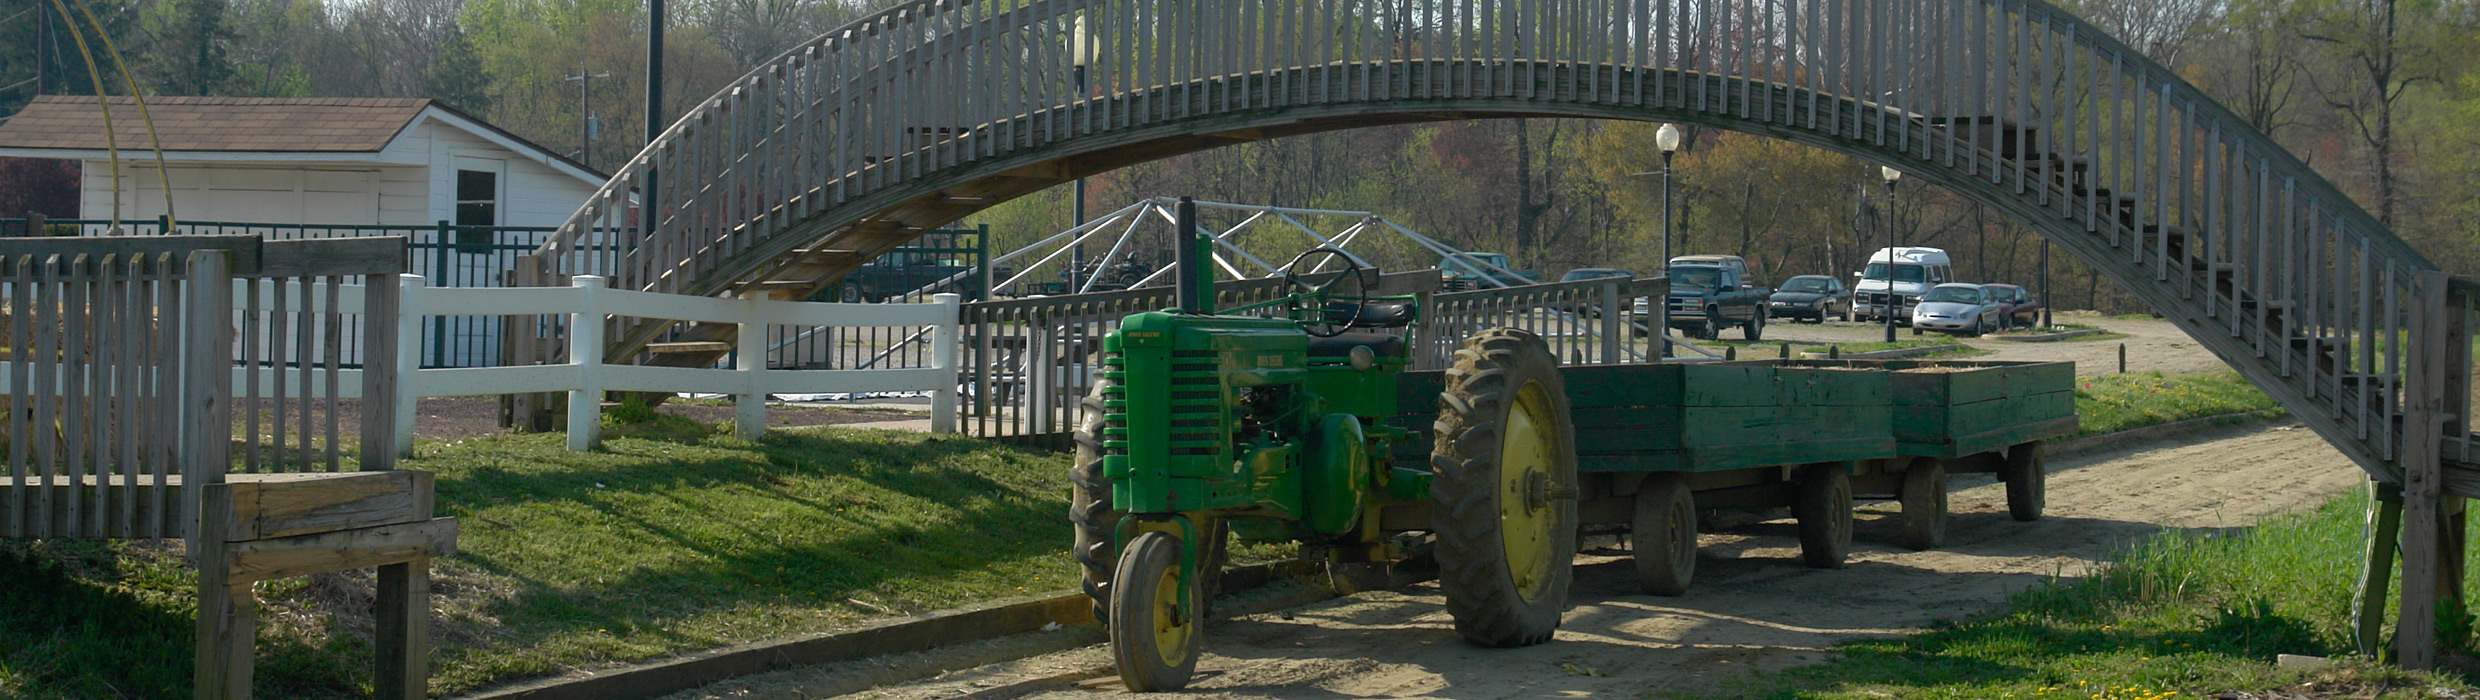 Tractor rides at the farm